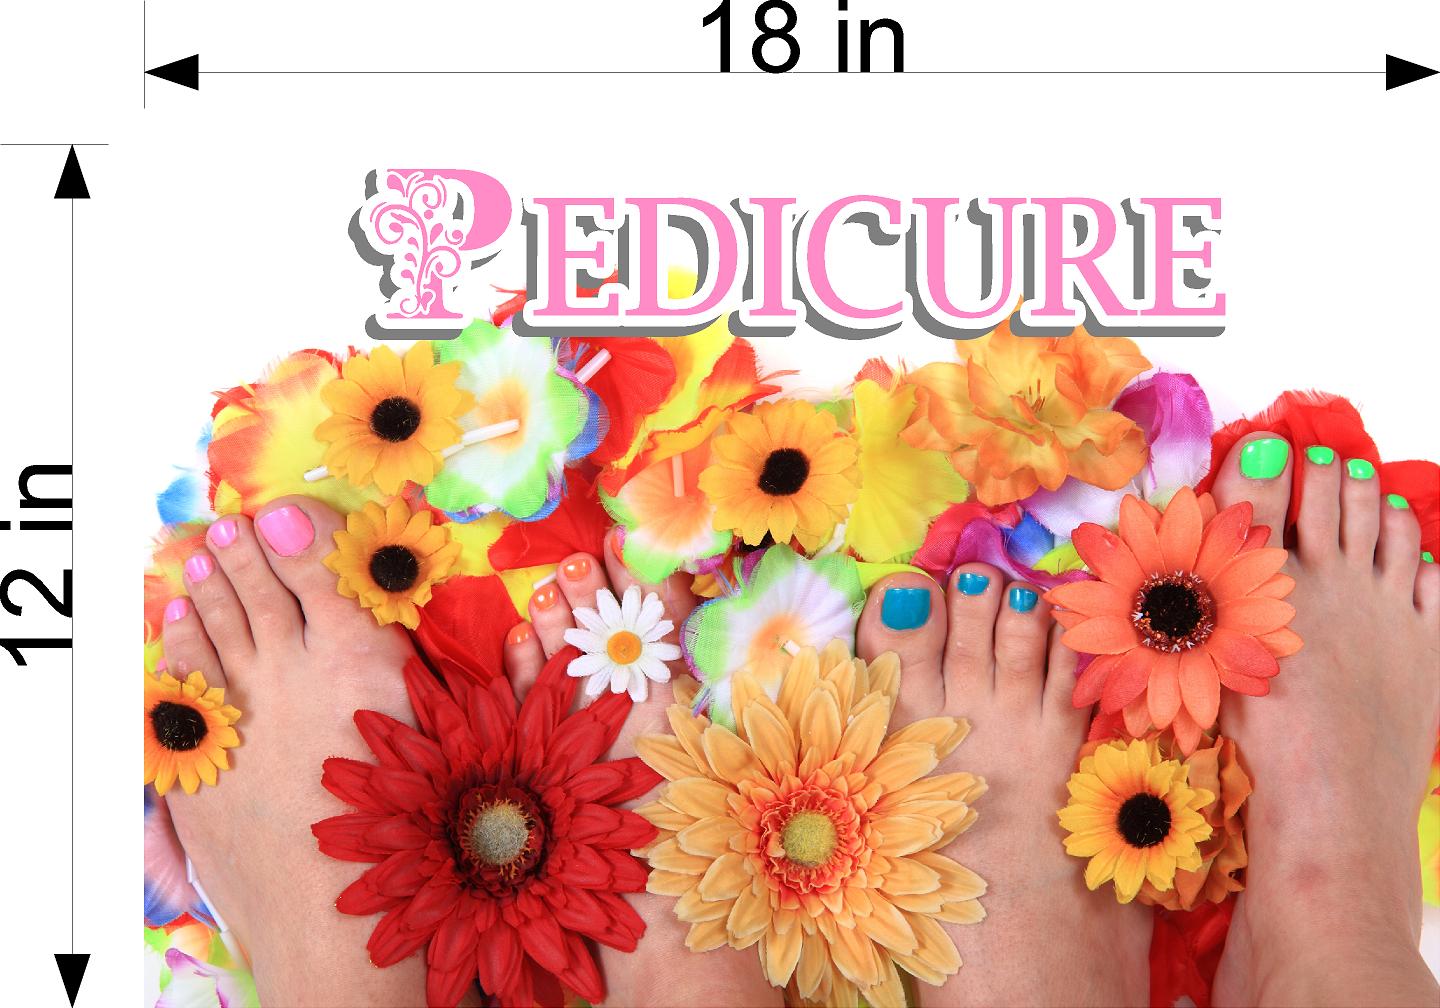 Pedicure 30 Wallpaper Fabric Poster Decal with Adhesive Backing Wall Sticker Decor Indoors Interior Sign Horizontal